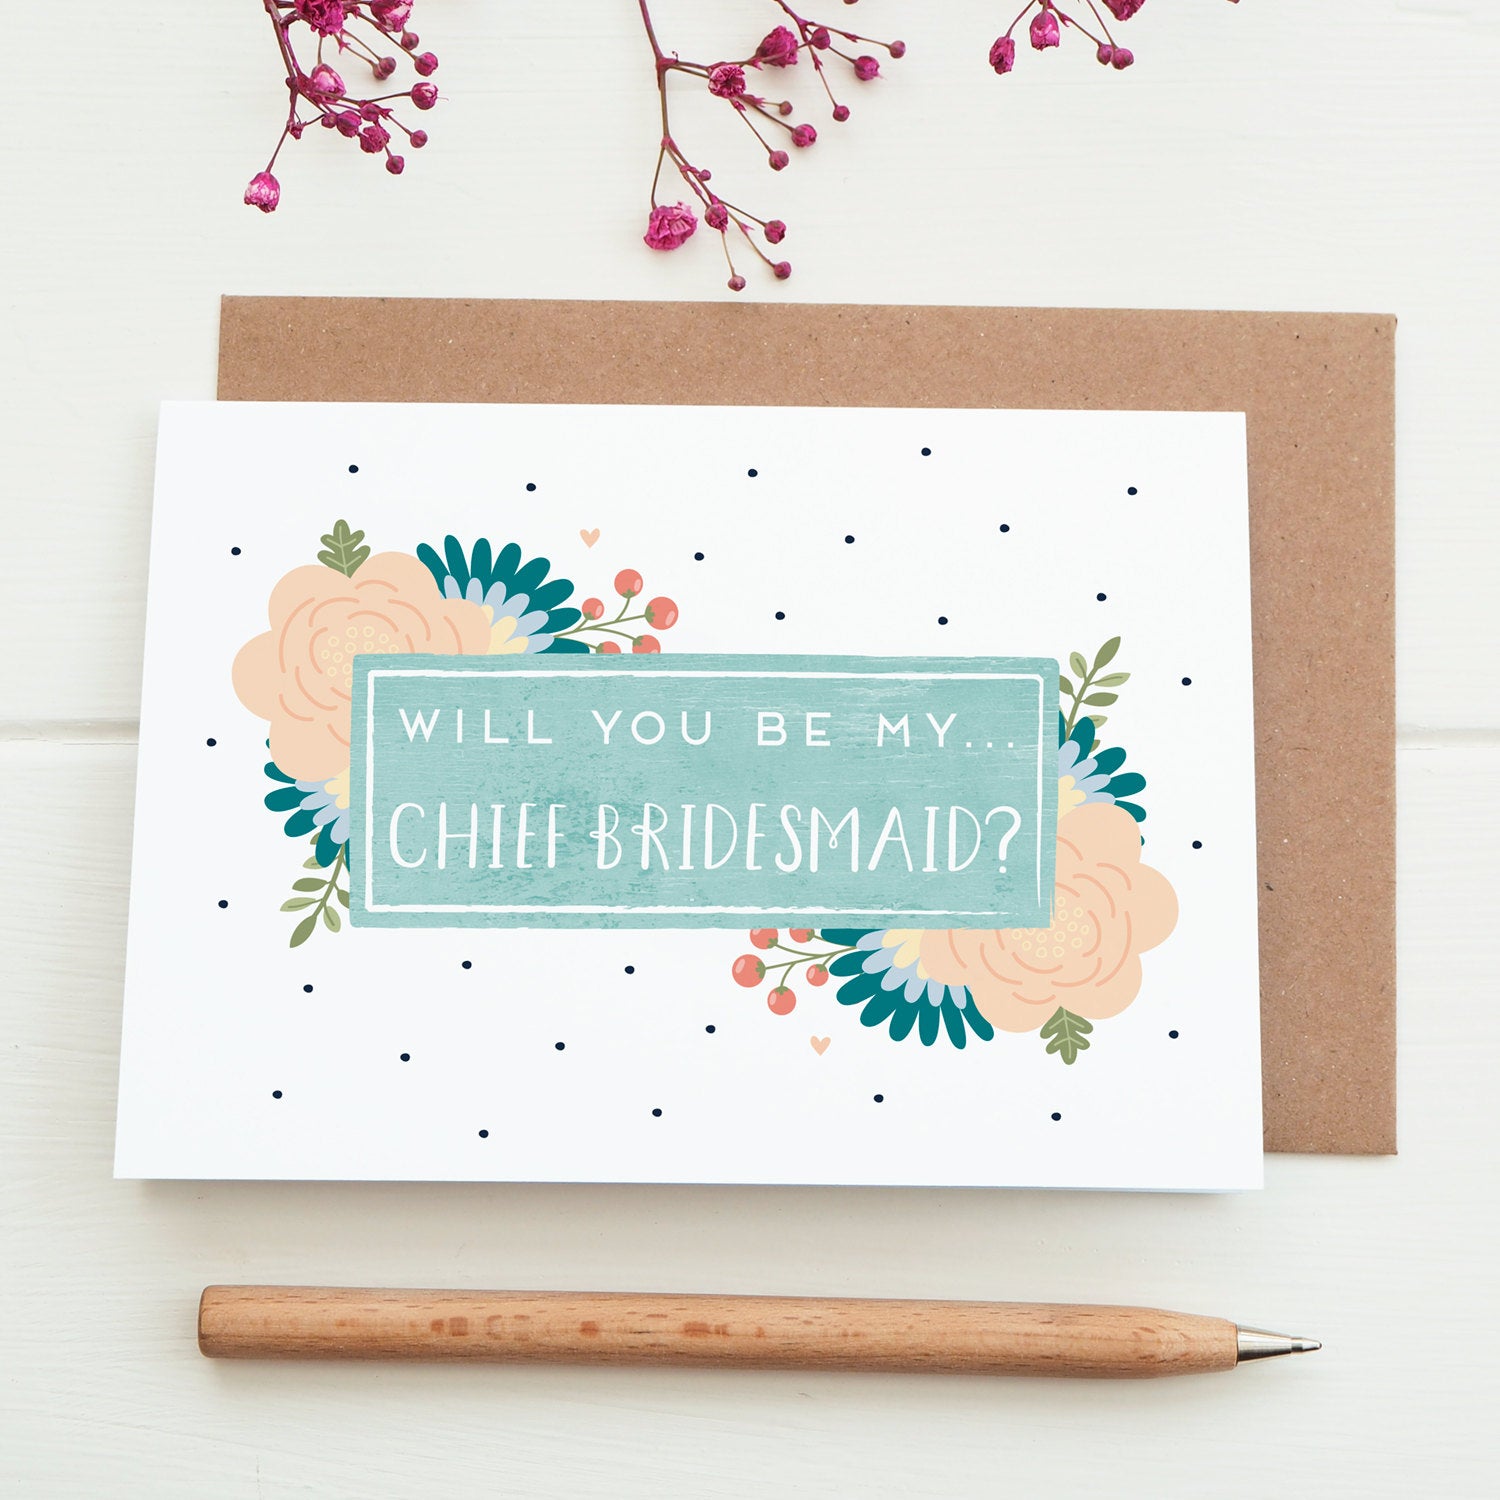 Will you be my chief bridesmaid card in blue